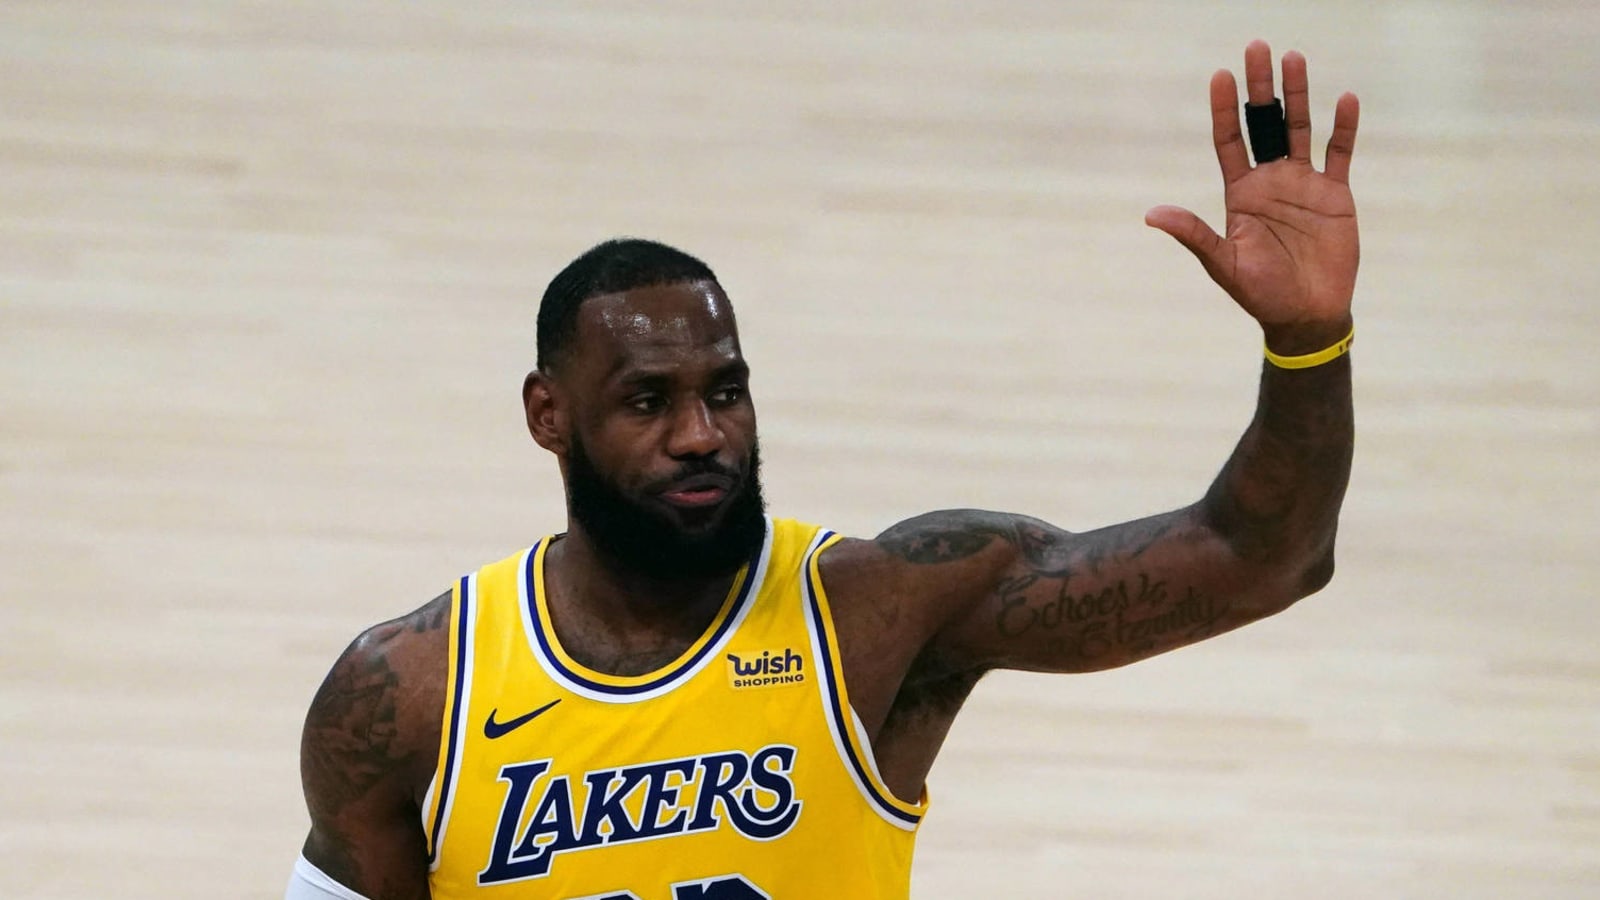 LeBron James pumps brakes on Nets hype ahead of Lakers game